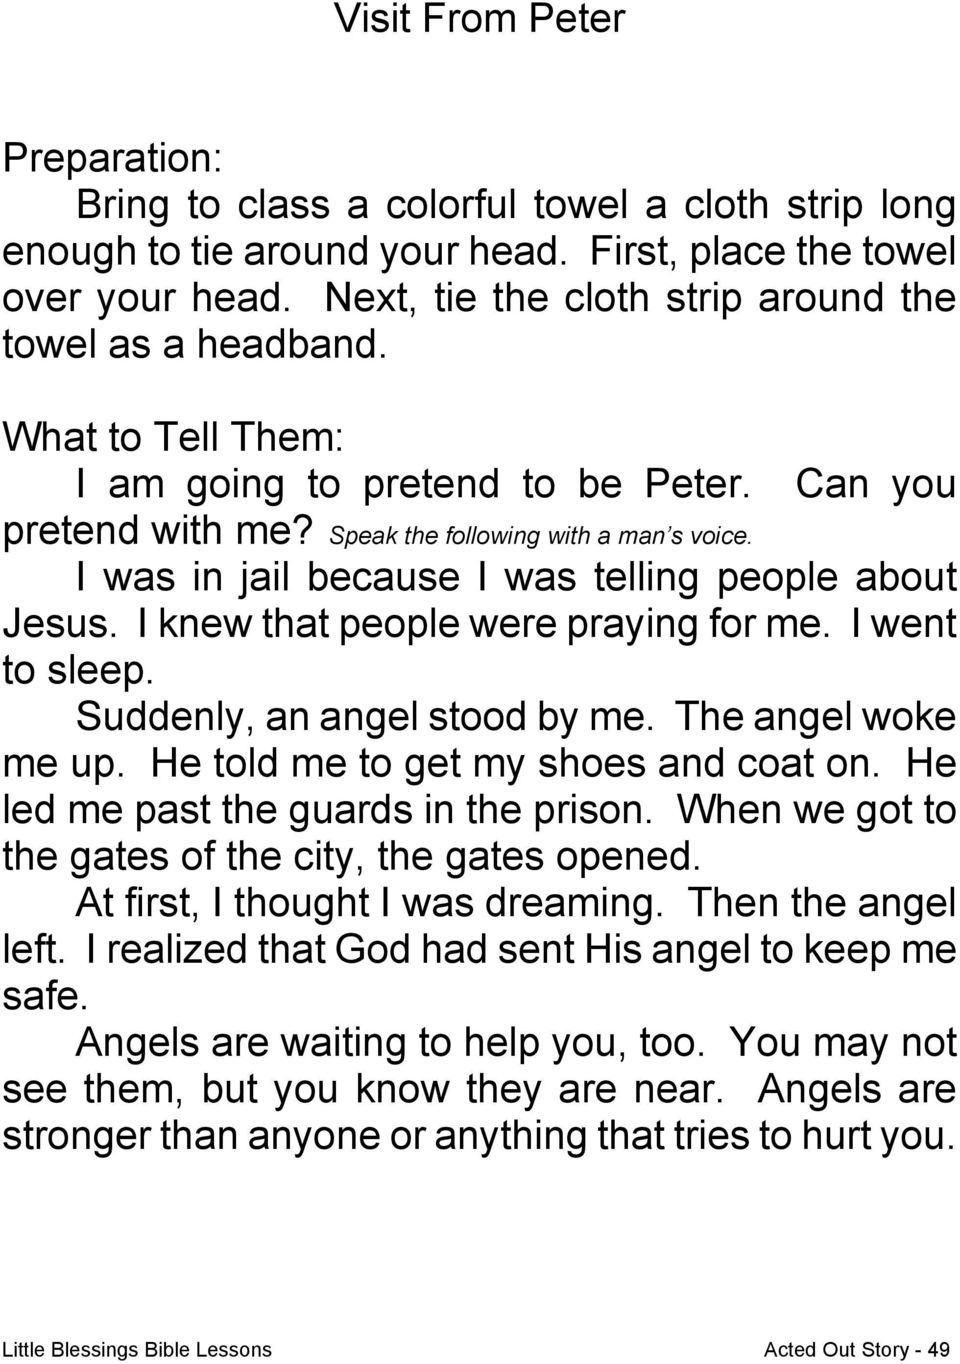 I was in jail because I was telling people about Jesus. I knew that people were praying for me. I went to sleep. Suddenly, an angel stood by me. The angel woke me up.